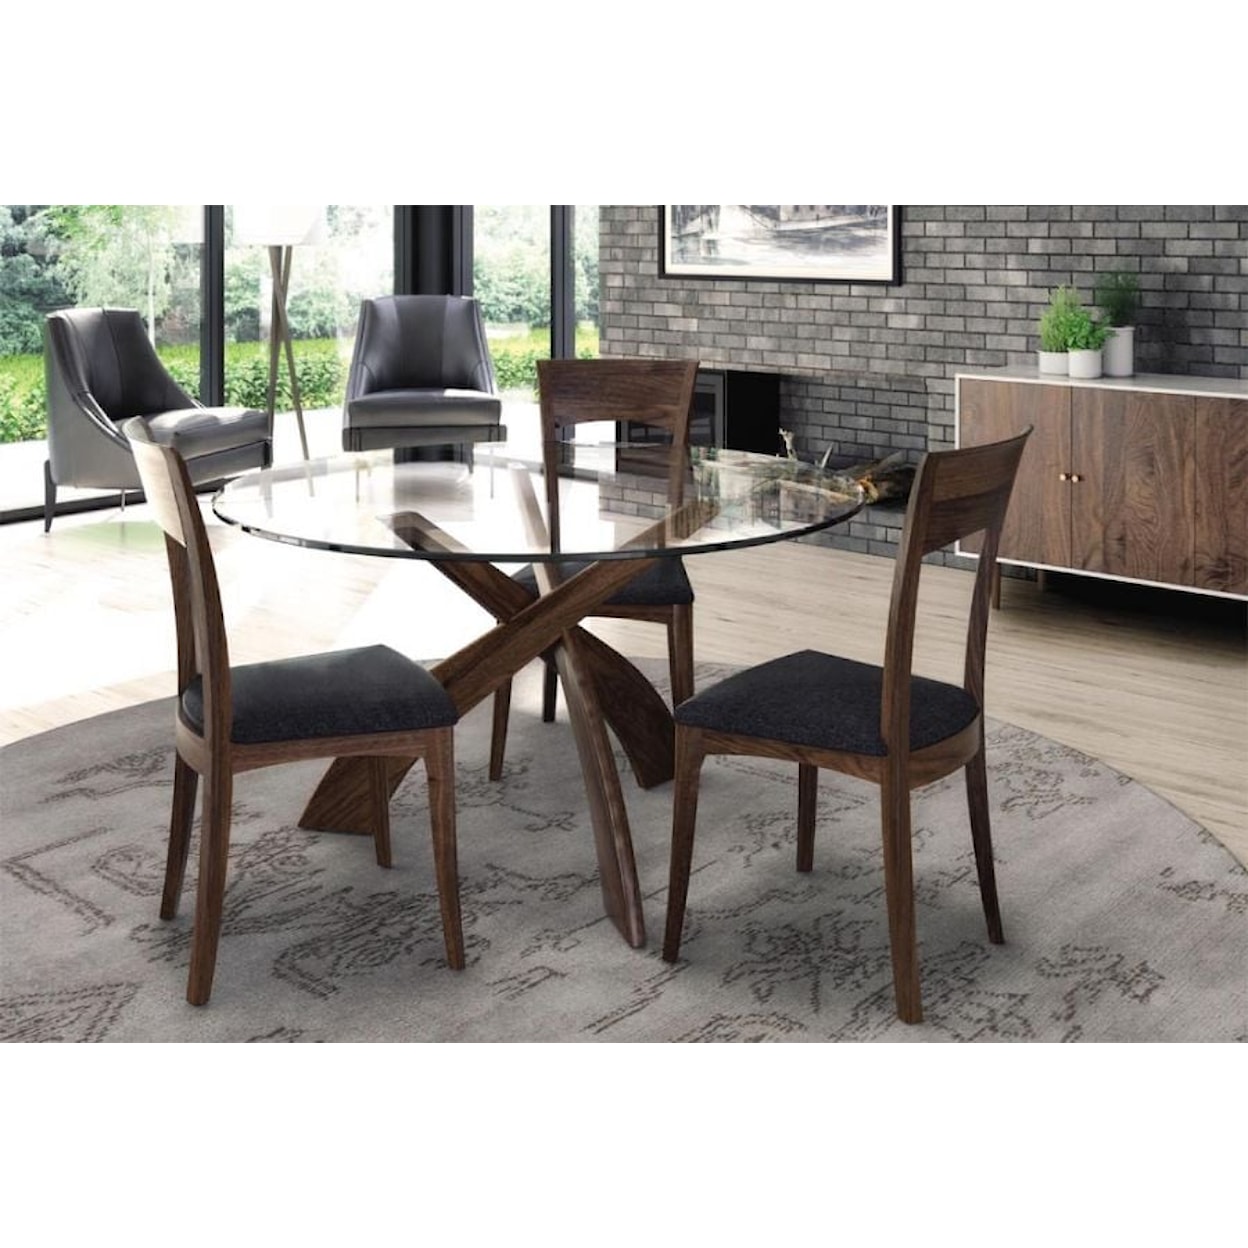 Copeland Entwine 48" Round Dining Table